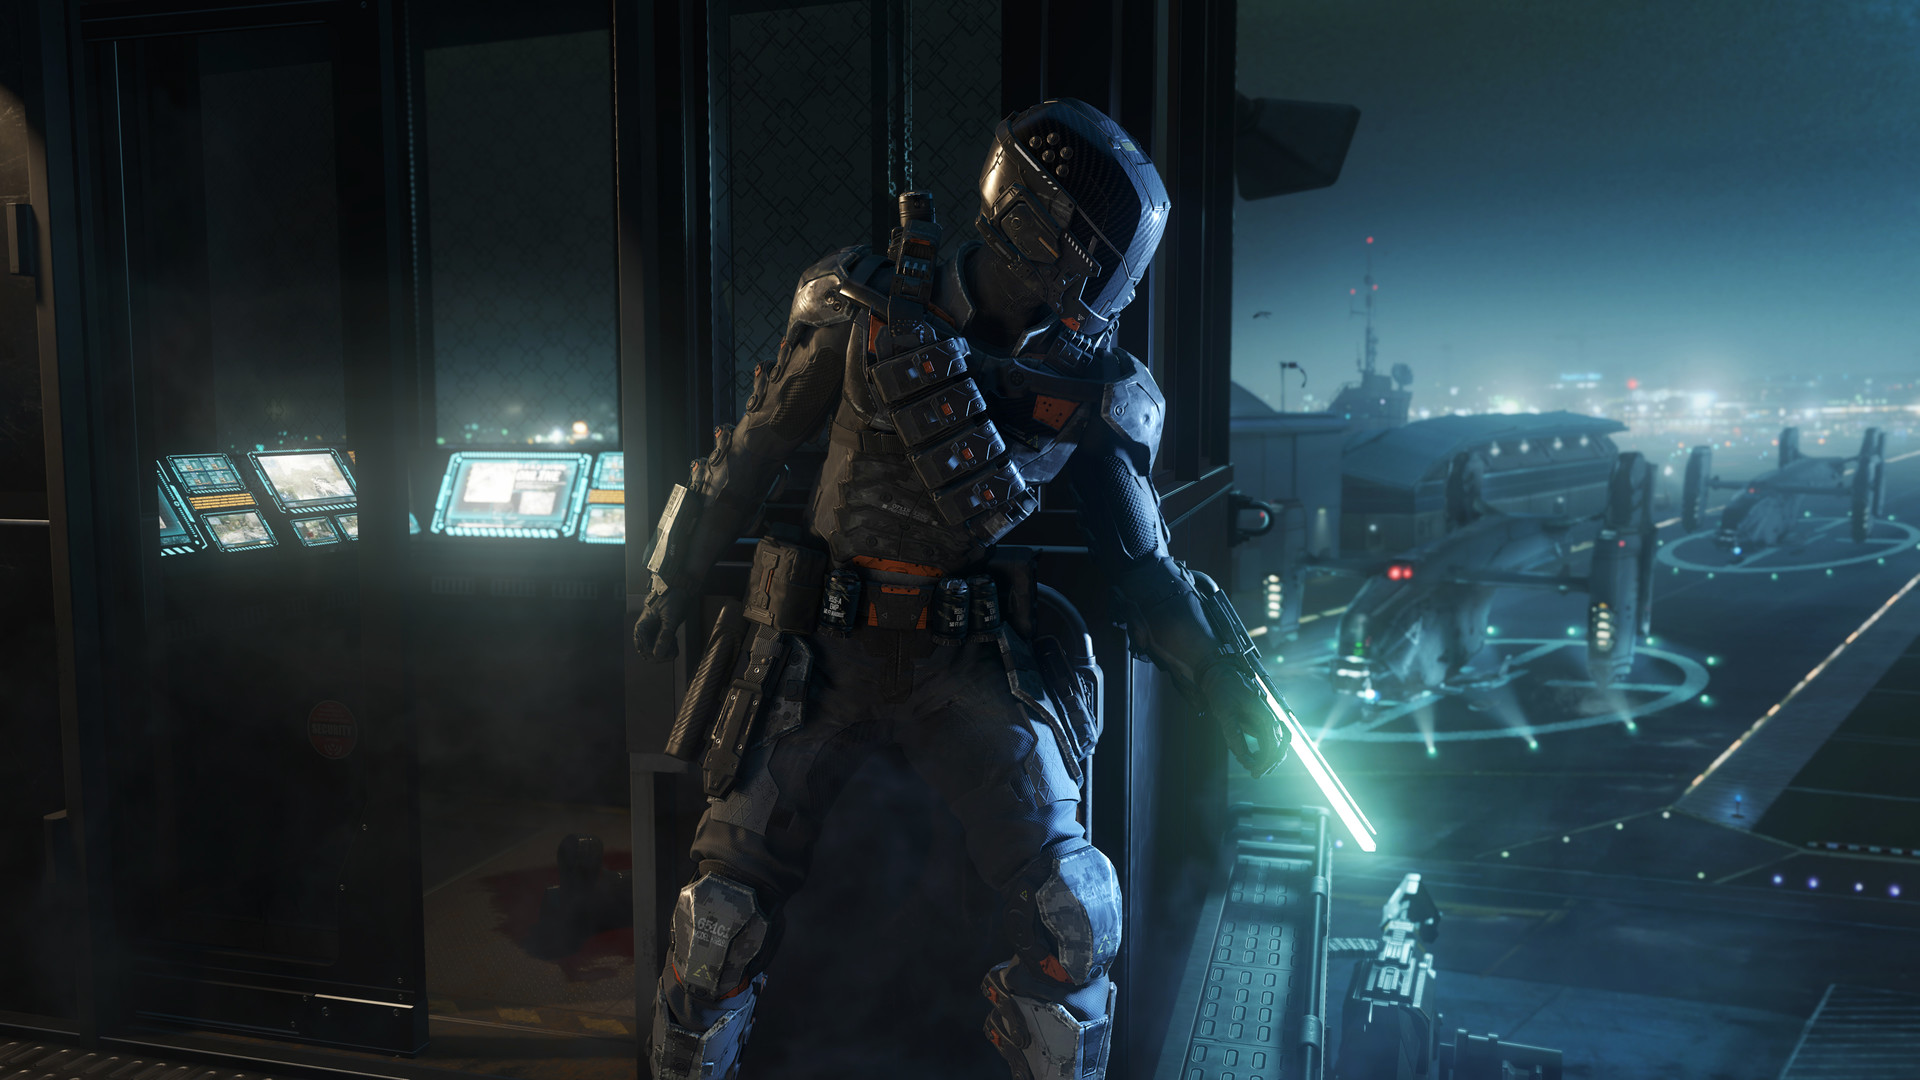 Call of Duty Black Ops III Images 